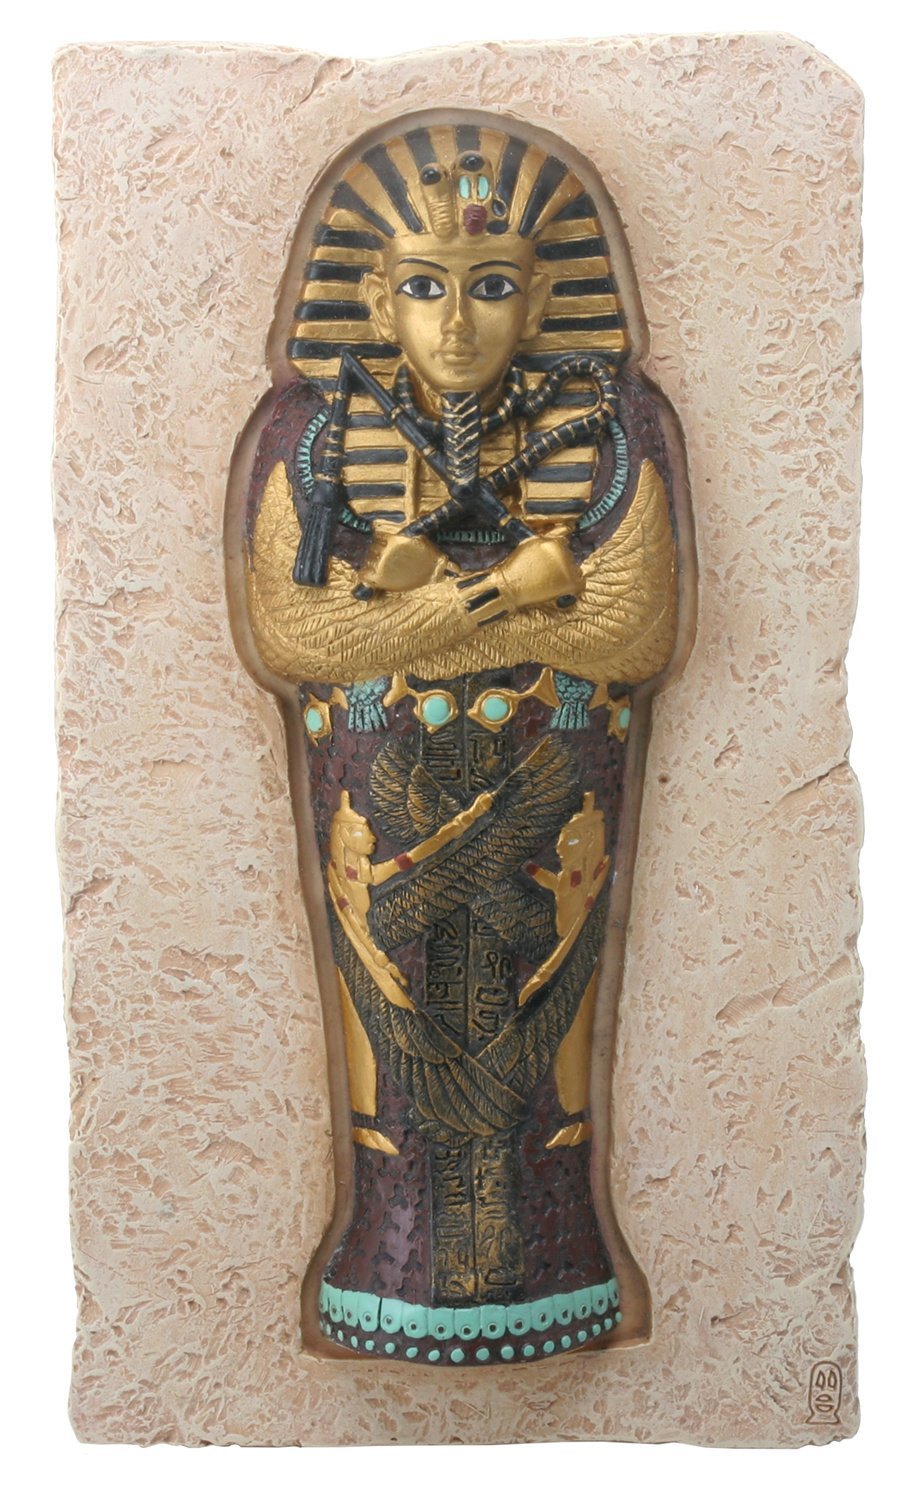 8 Inch Egyptian King Tut Coffin Set in Stone Background Plaque